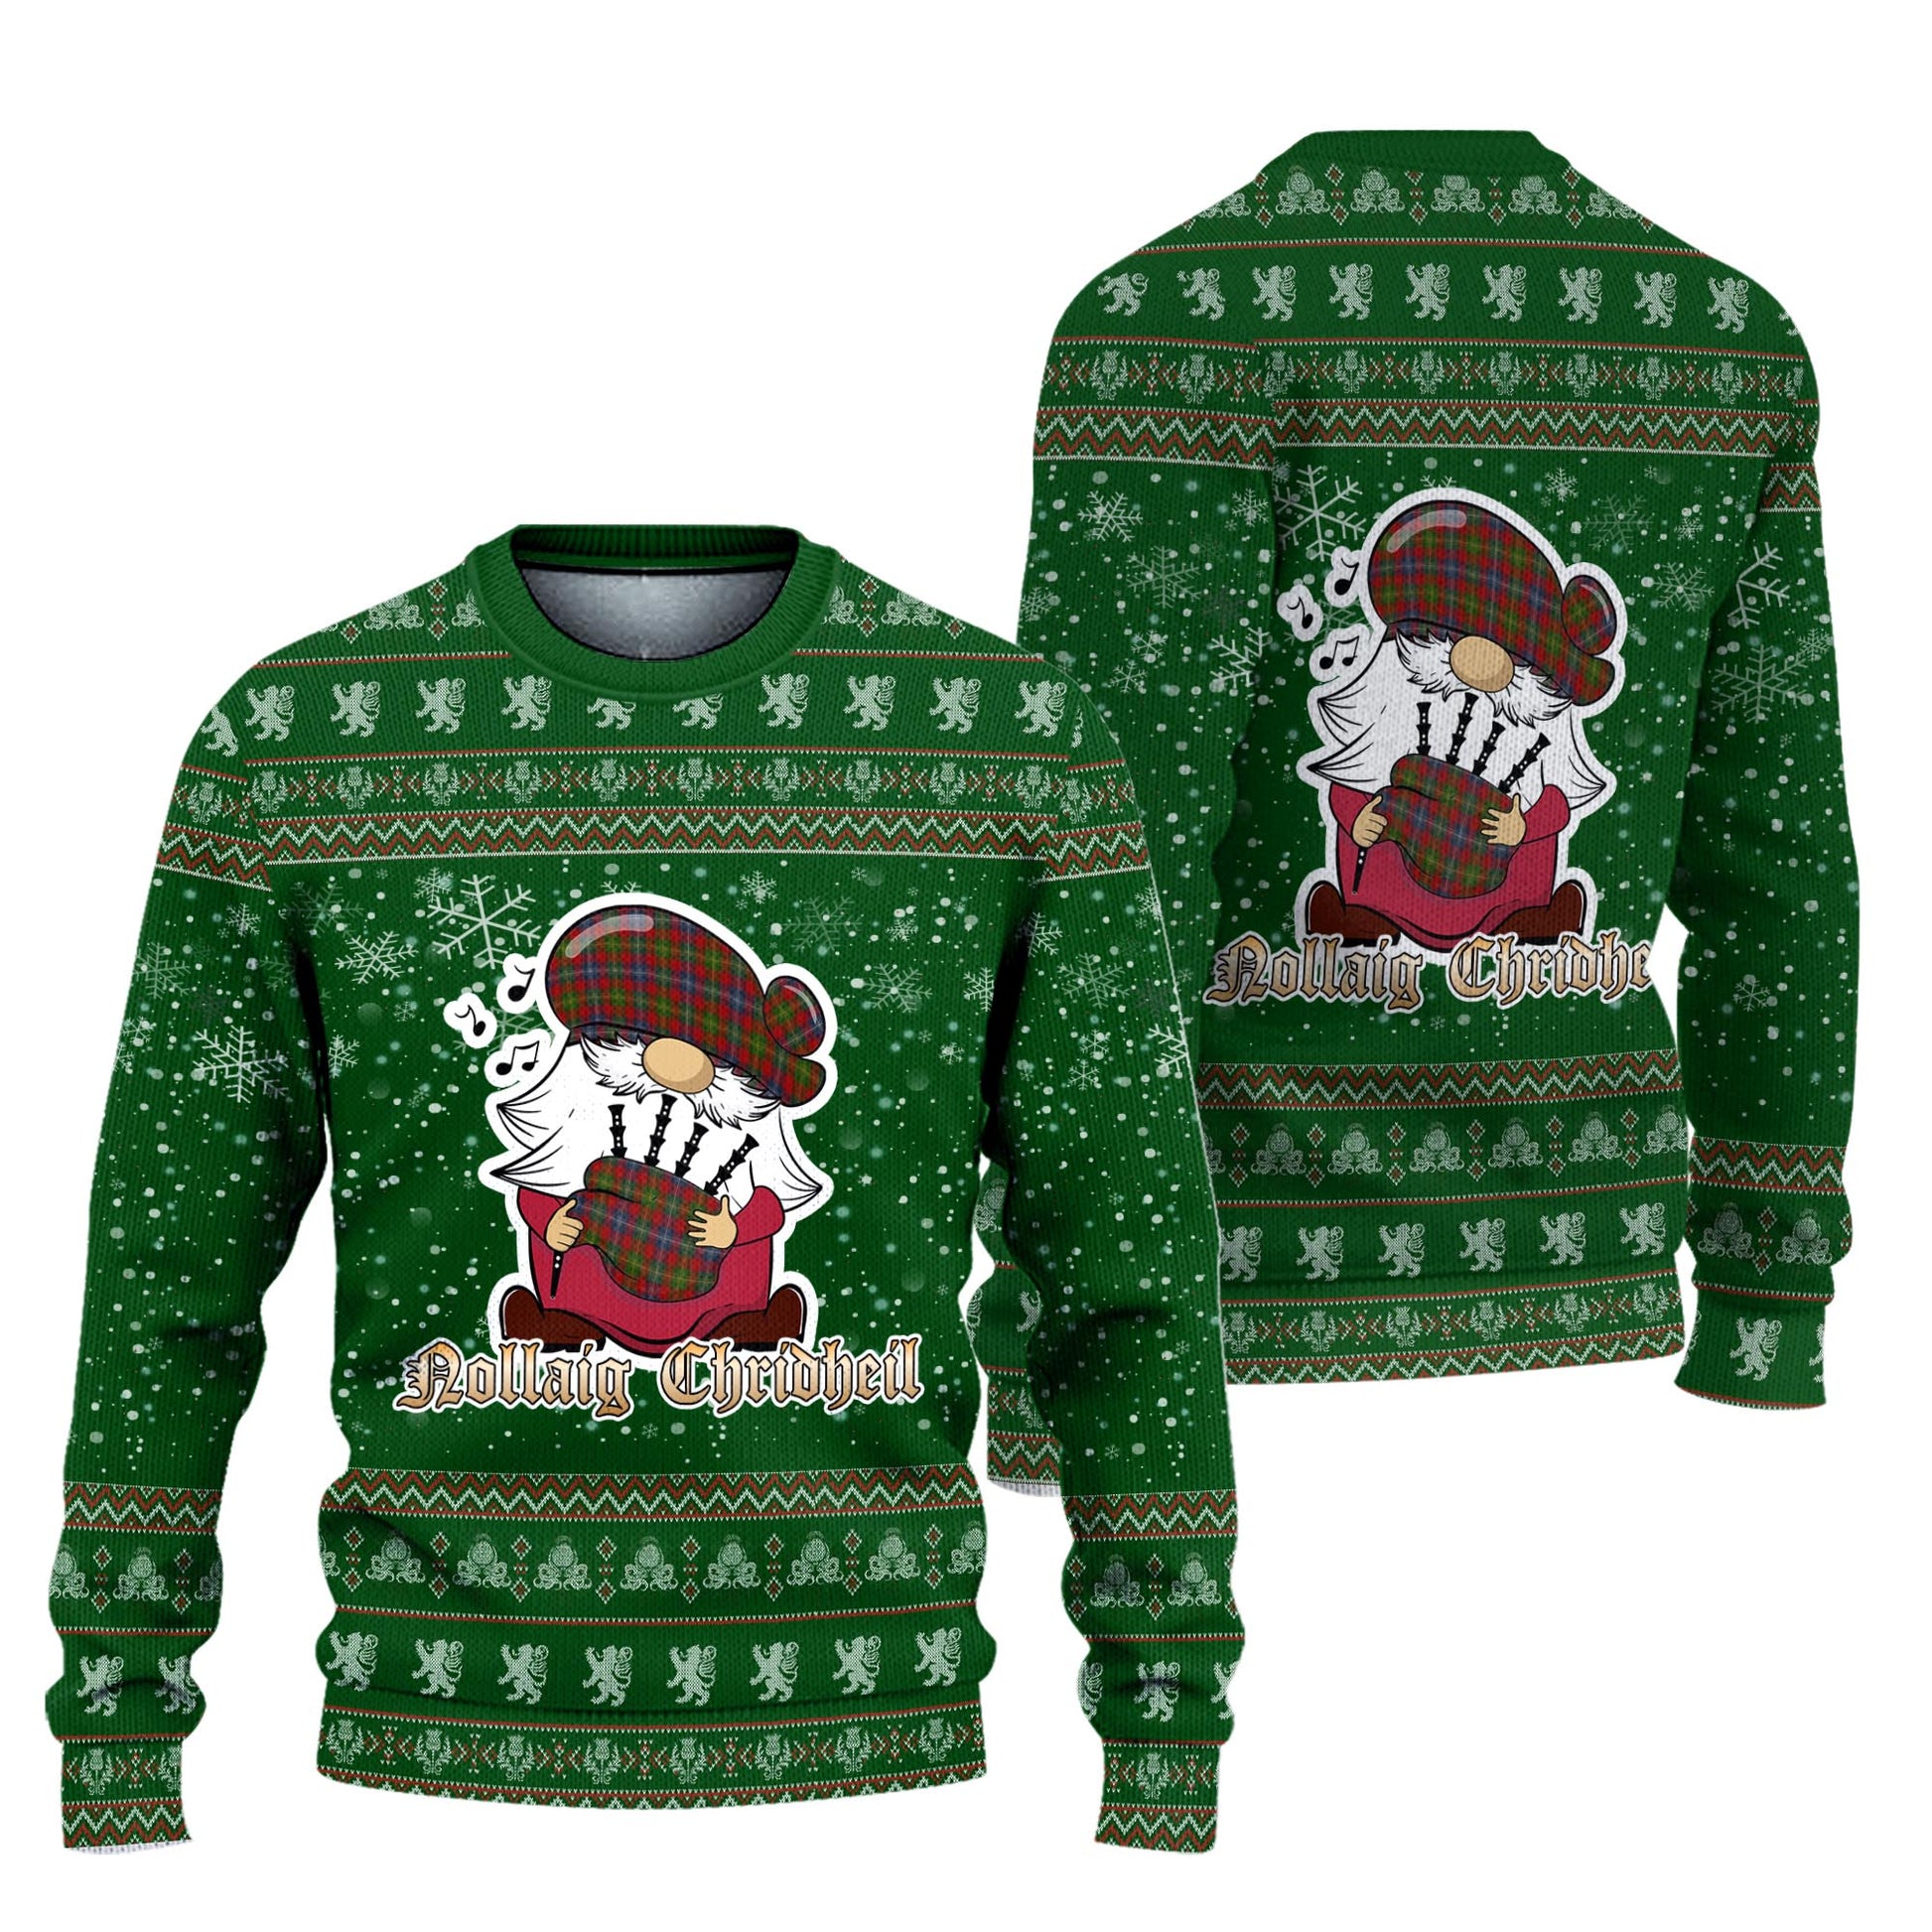 Forrester or Foster Clan Christmas Family Knitted Sweater with Funny Gnome Playing Bagpipes Unisex Green - Tartanvibesclothing